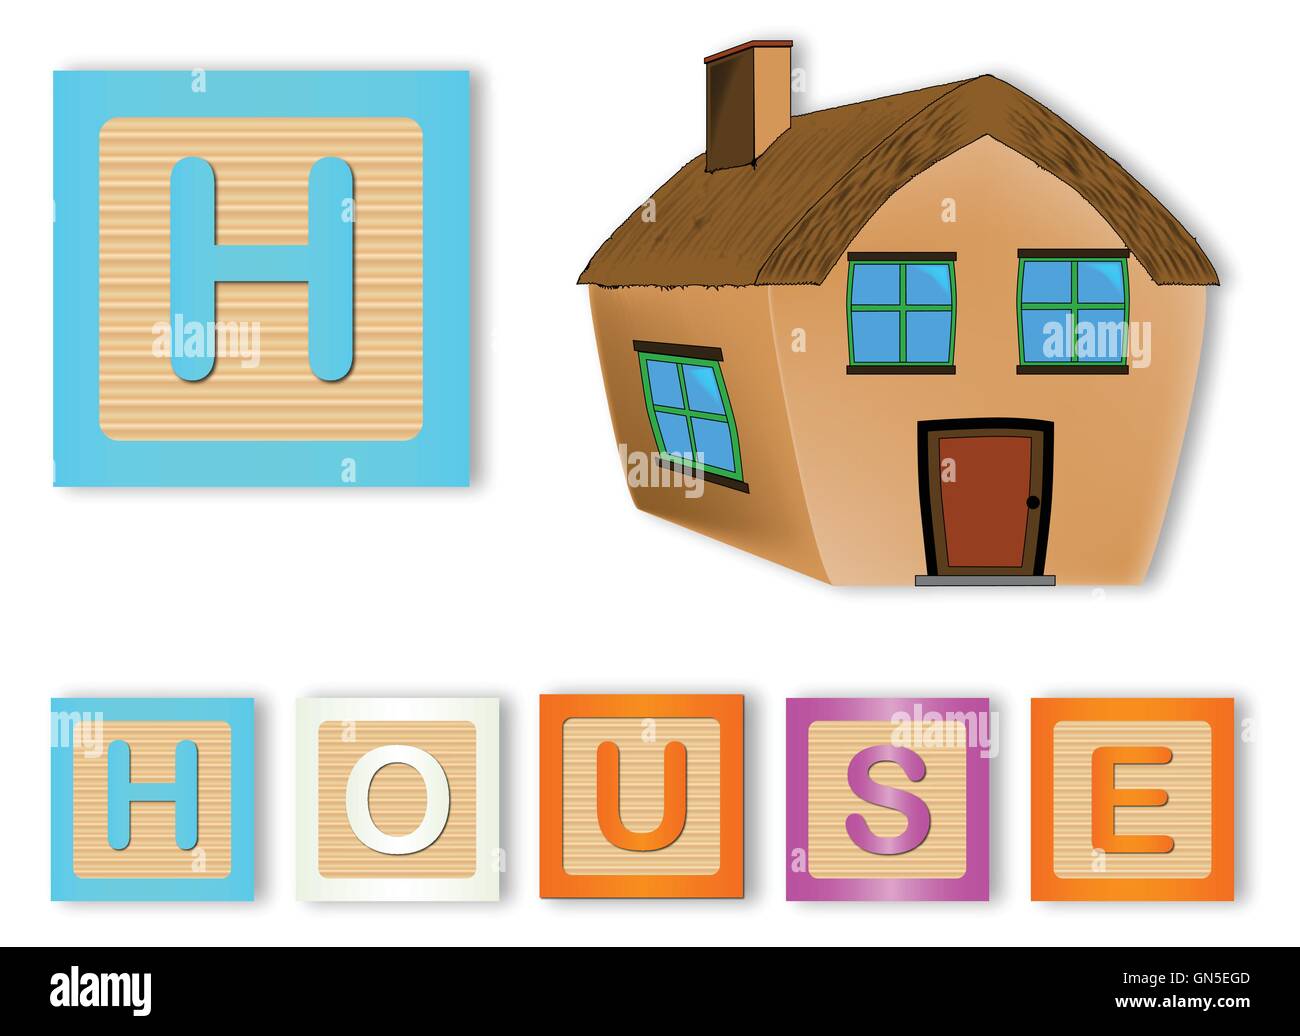 H Is For House Stock Vector